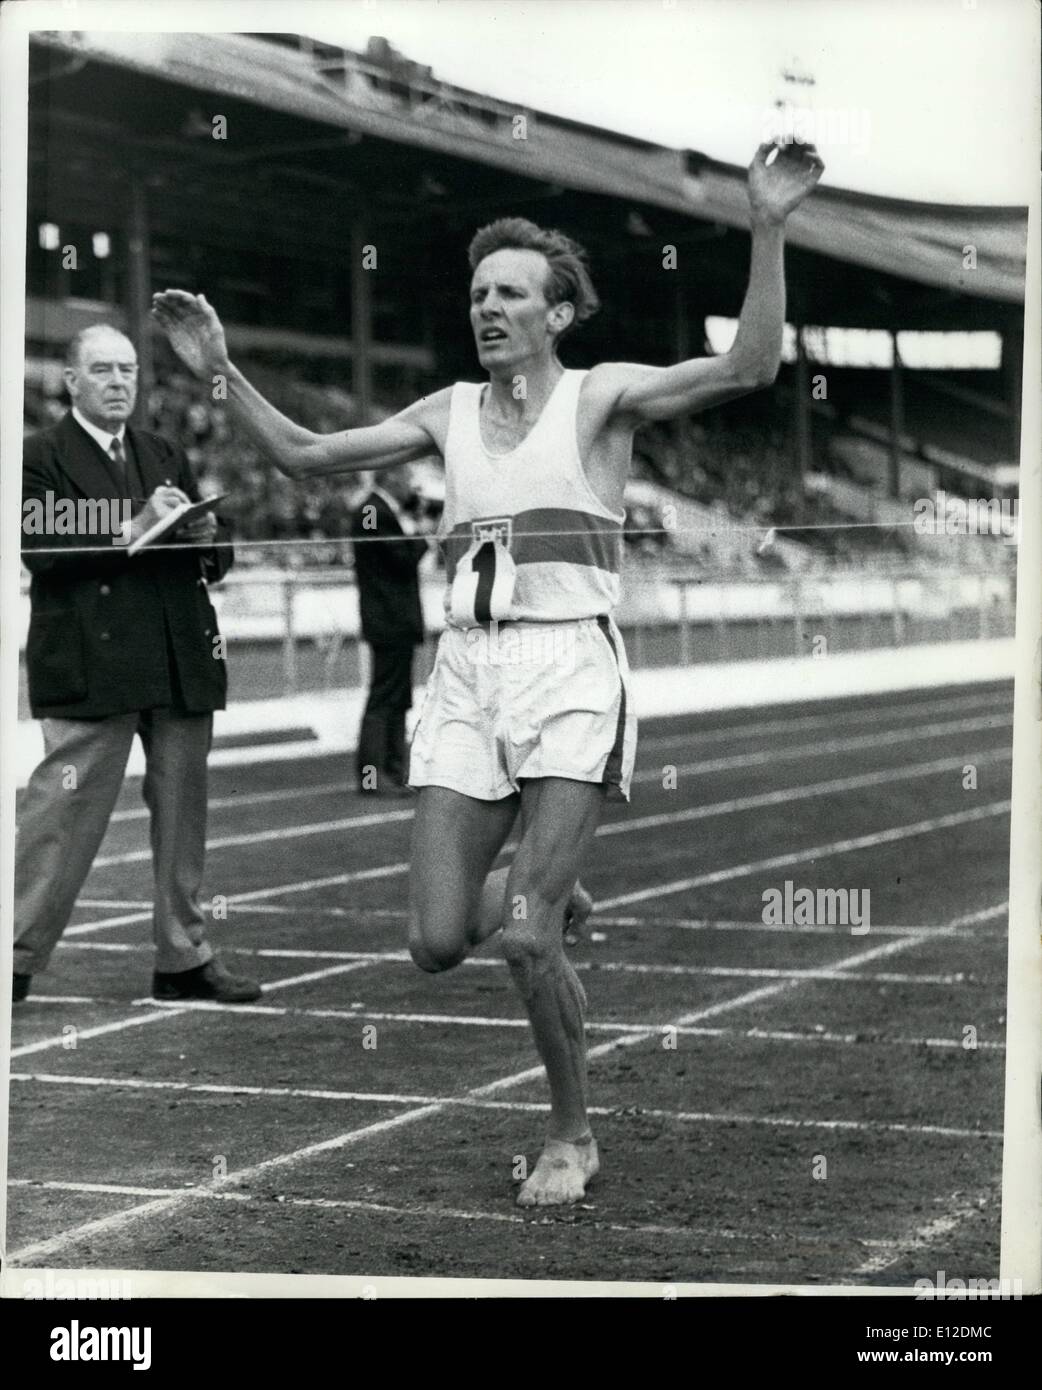 Dec. 19, 2011 - Tulloh Wins White City Three Miles Barefoot Bruce TRulloh throws up his arms as he wins the theww miles event of the Amateur Athletic Association Championships at the White City Stadium, London, July 13. Tulloh's time was 13 minutes 23.8 seconds. Stock Photo